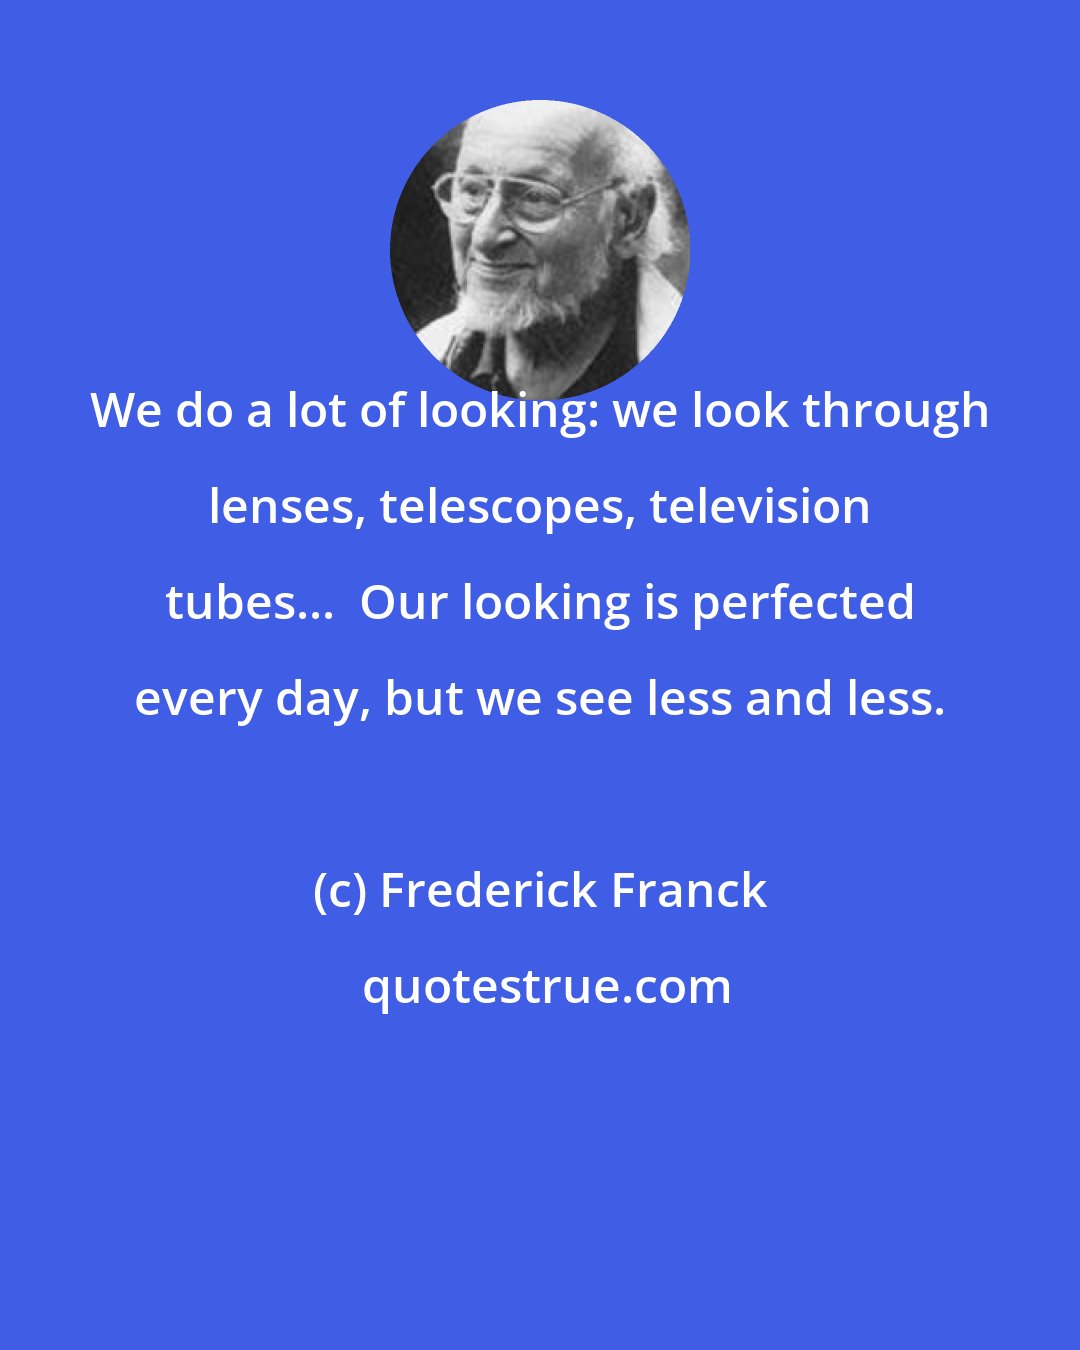 Frederick Franck: We do a lot of looking: we look through lenses, telescopes, television tubes...  Our looking is perfected every day, but we see less and less.